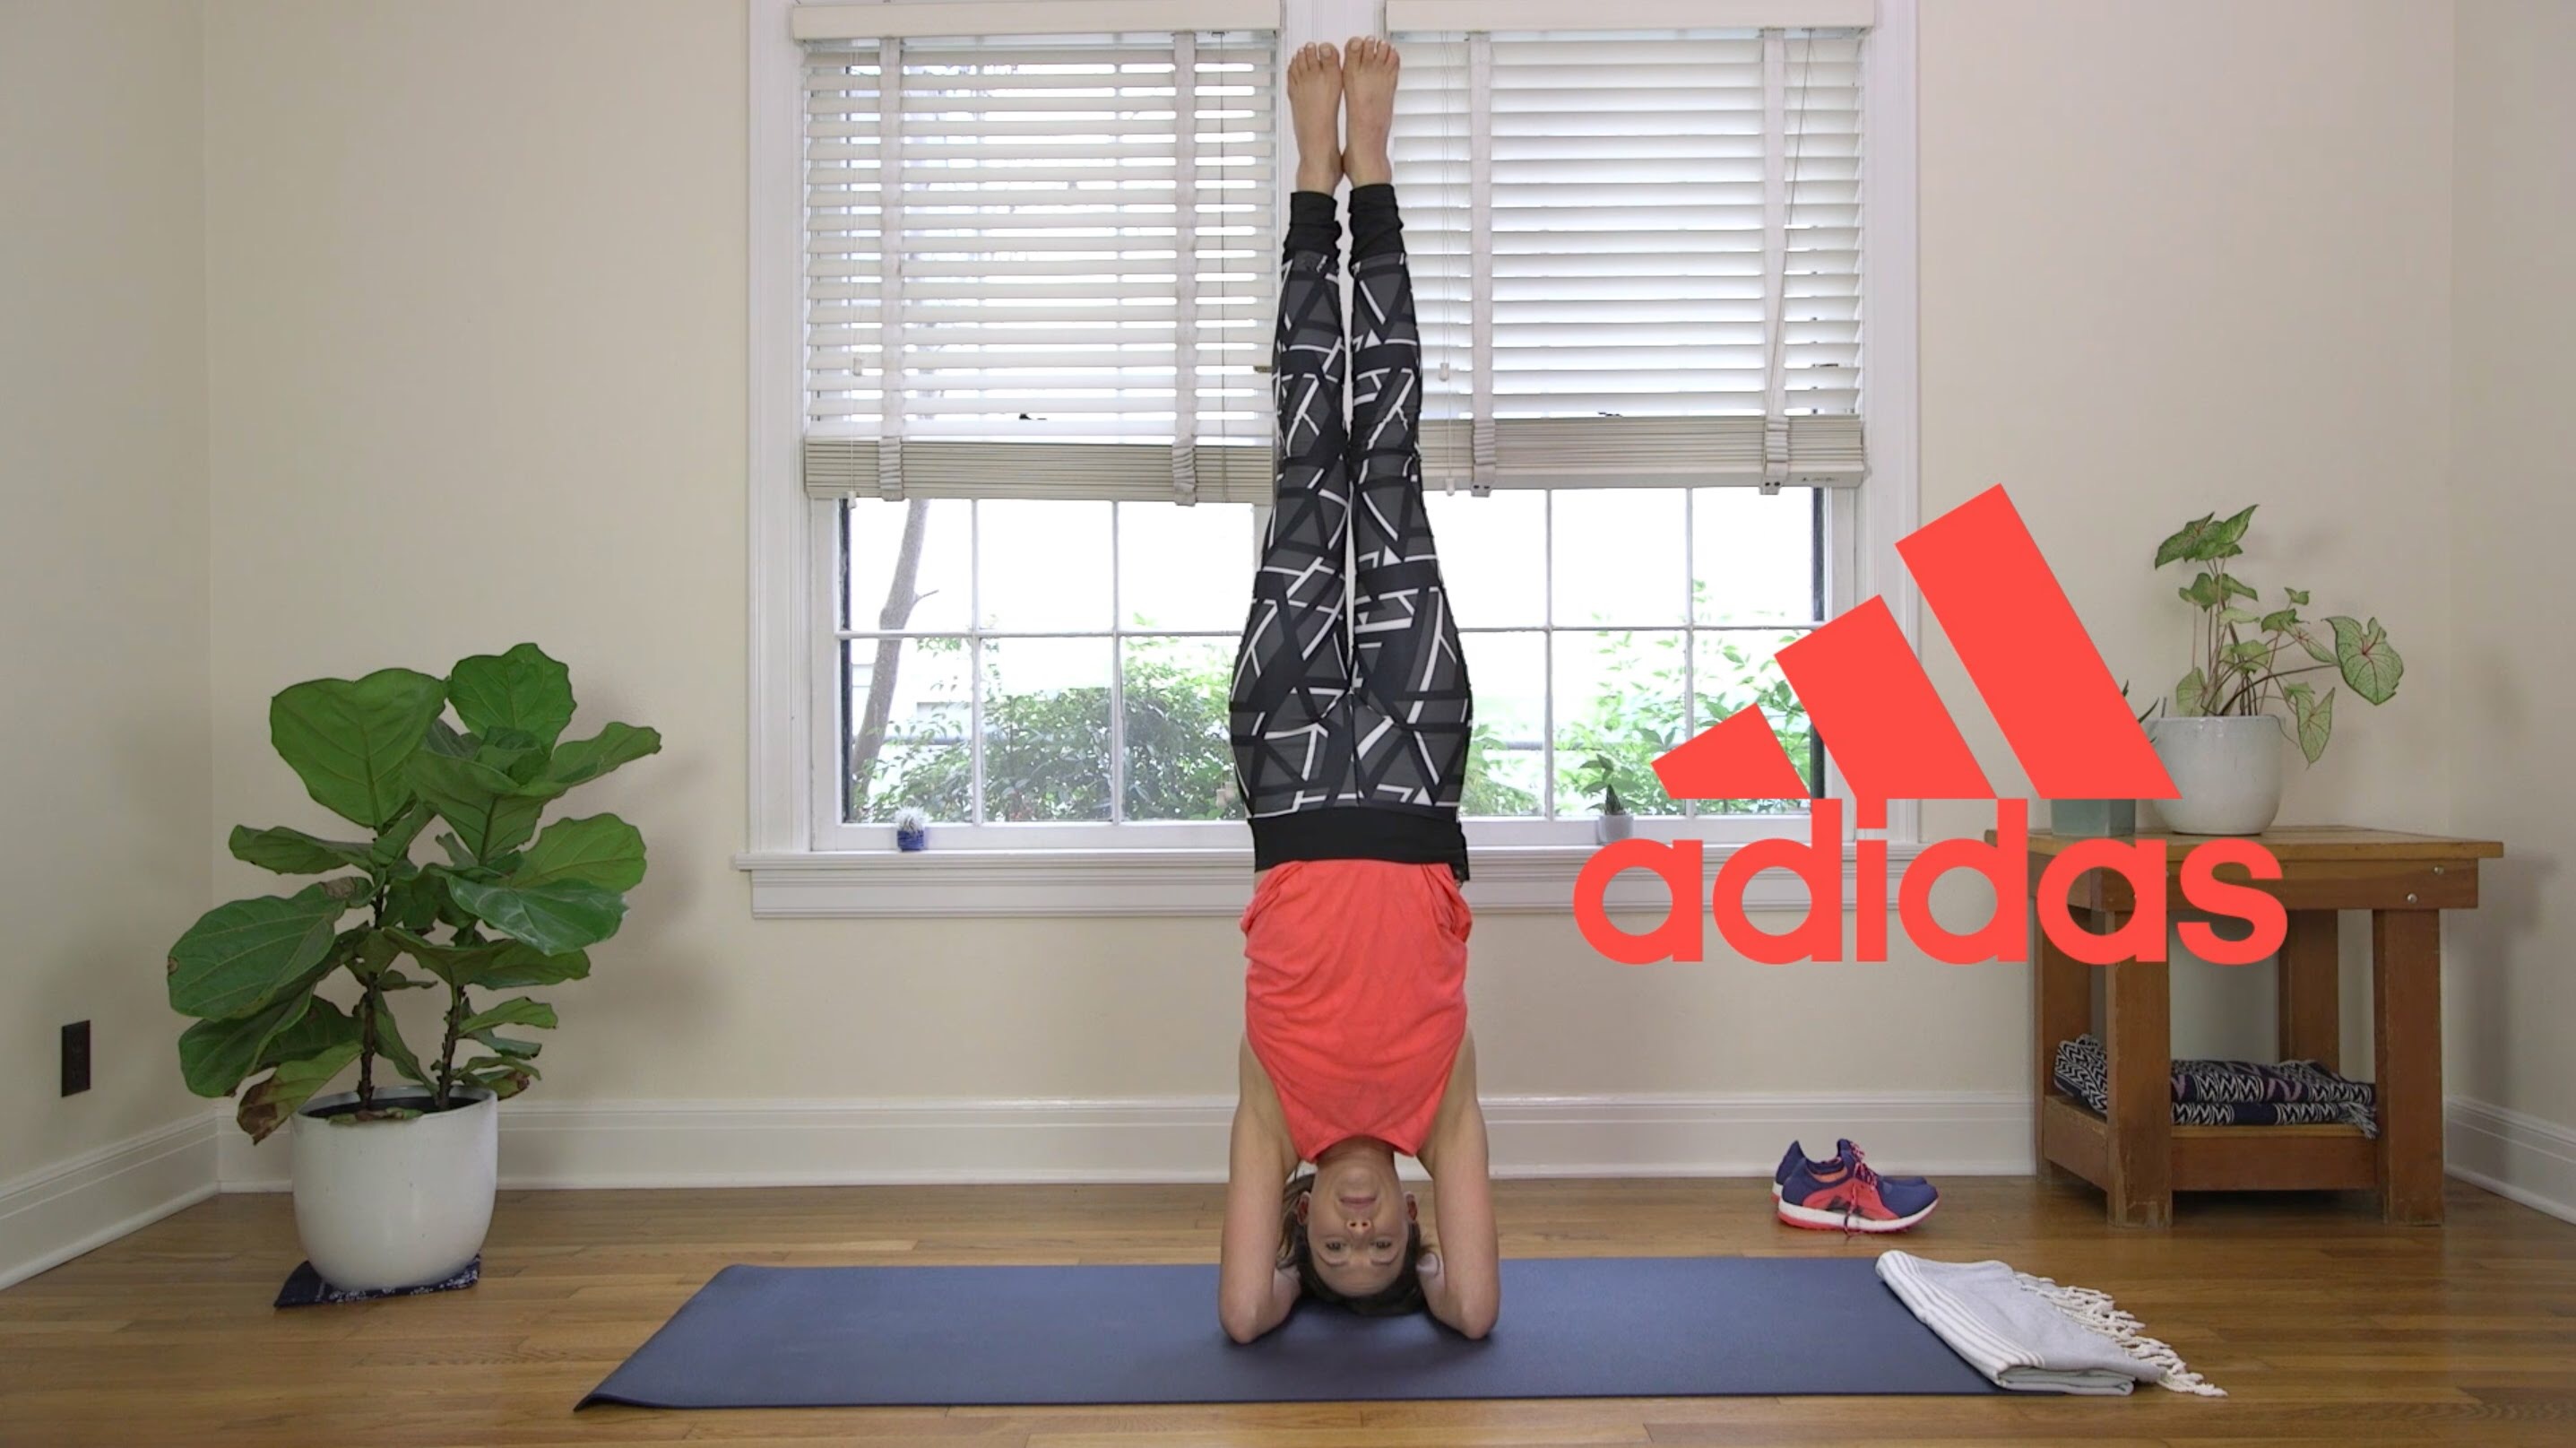 adidas yoga outfit